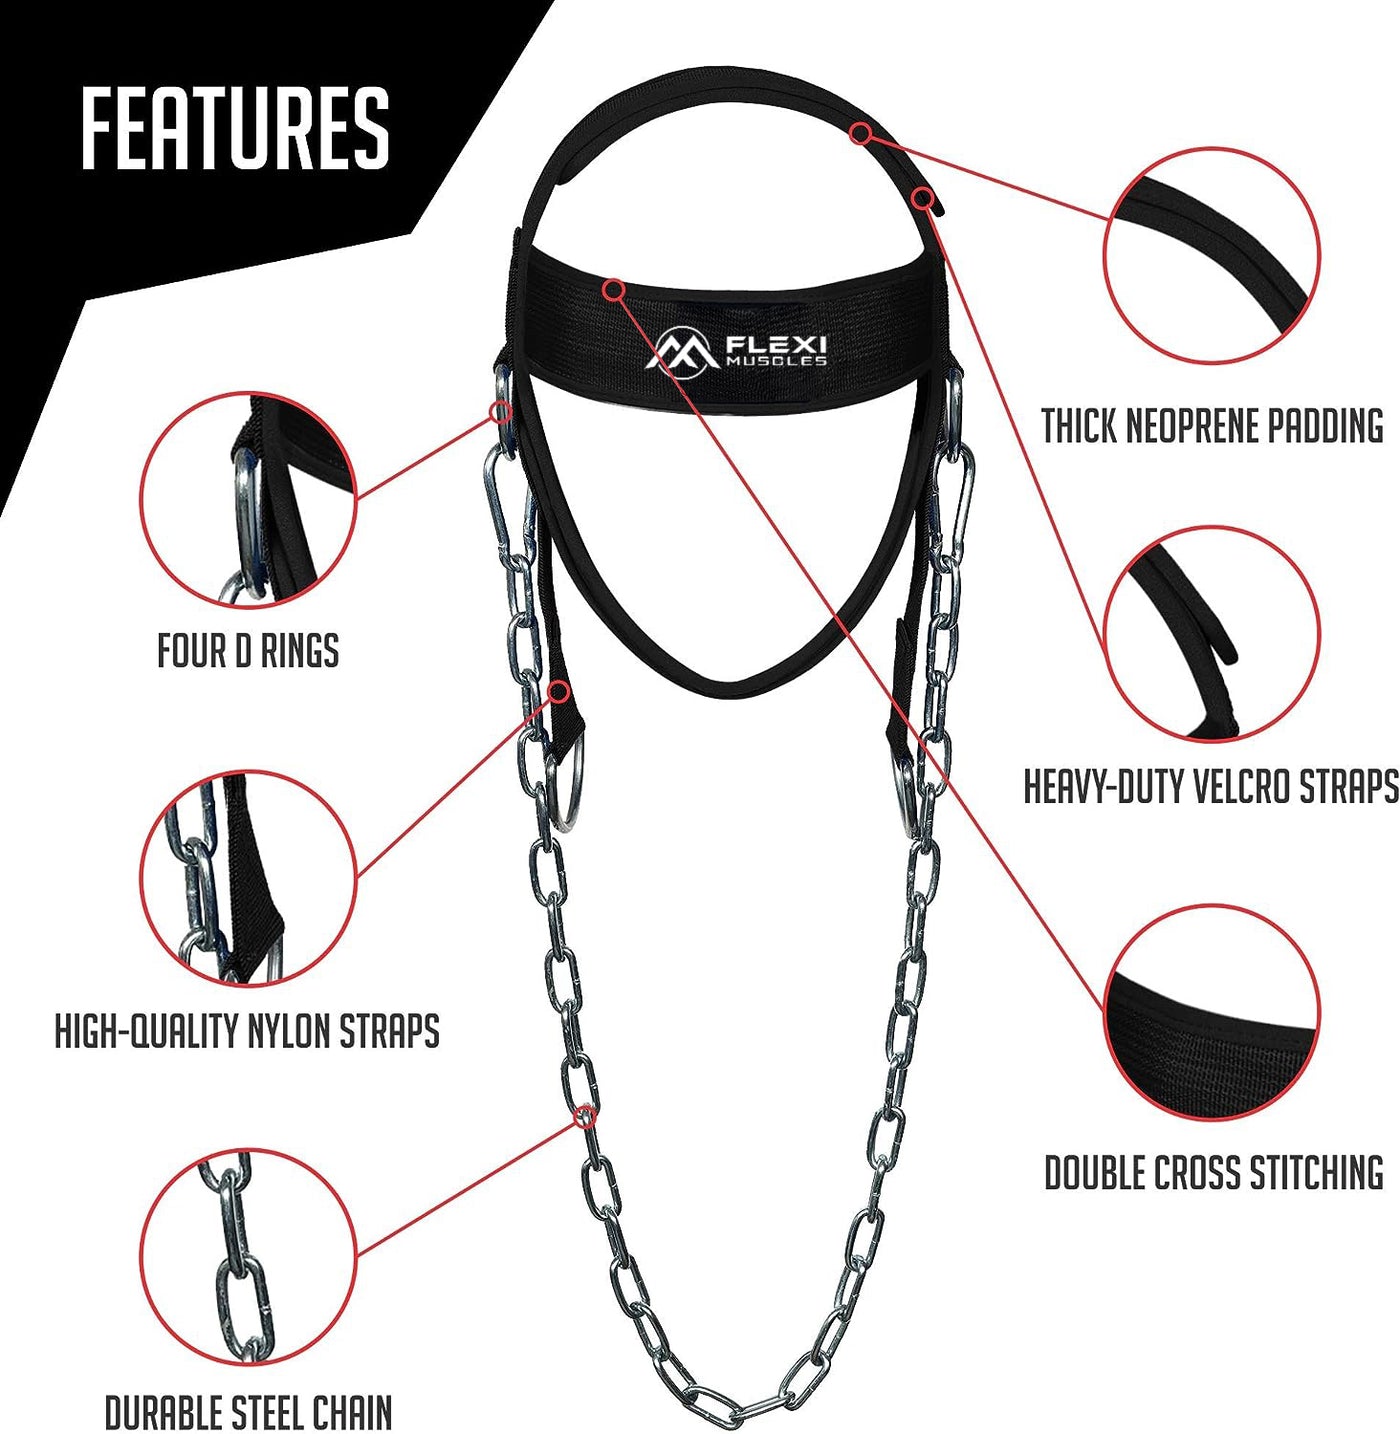 Flexi Muscles - Neck Harness for Weight Lifting and Resistance Training.